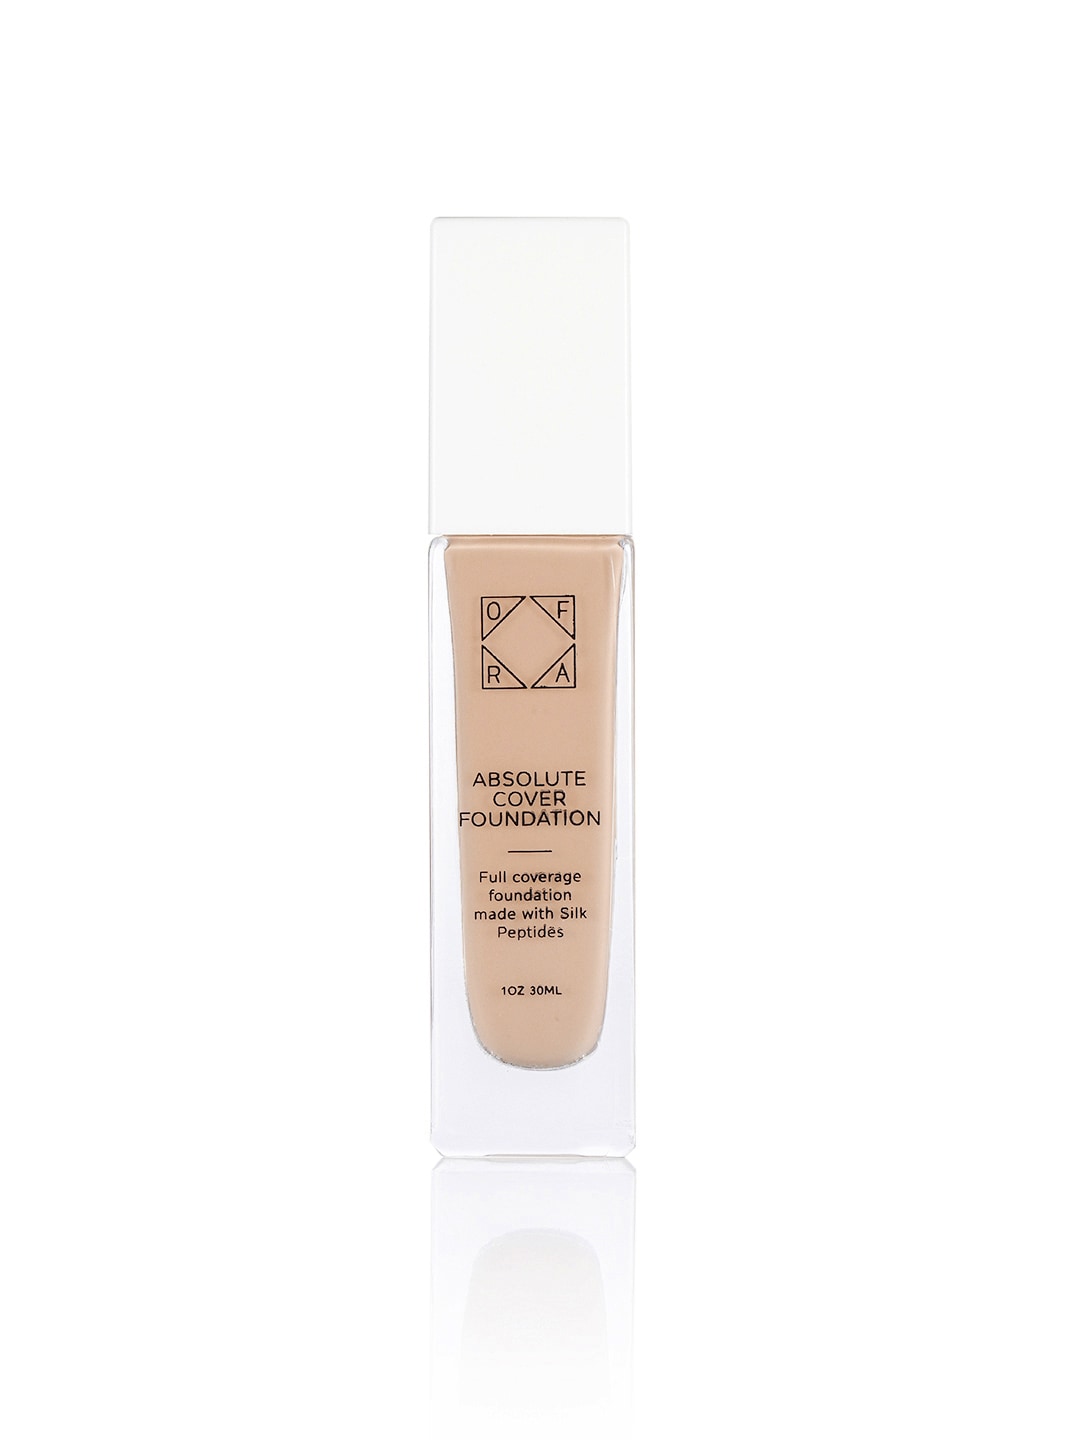 OFRA 3 Absolute Cover Silk Peptide Foundation 30ml Price in India